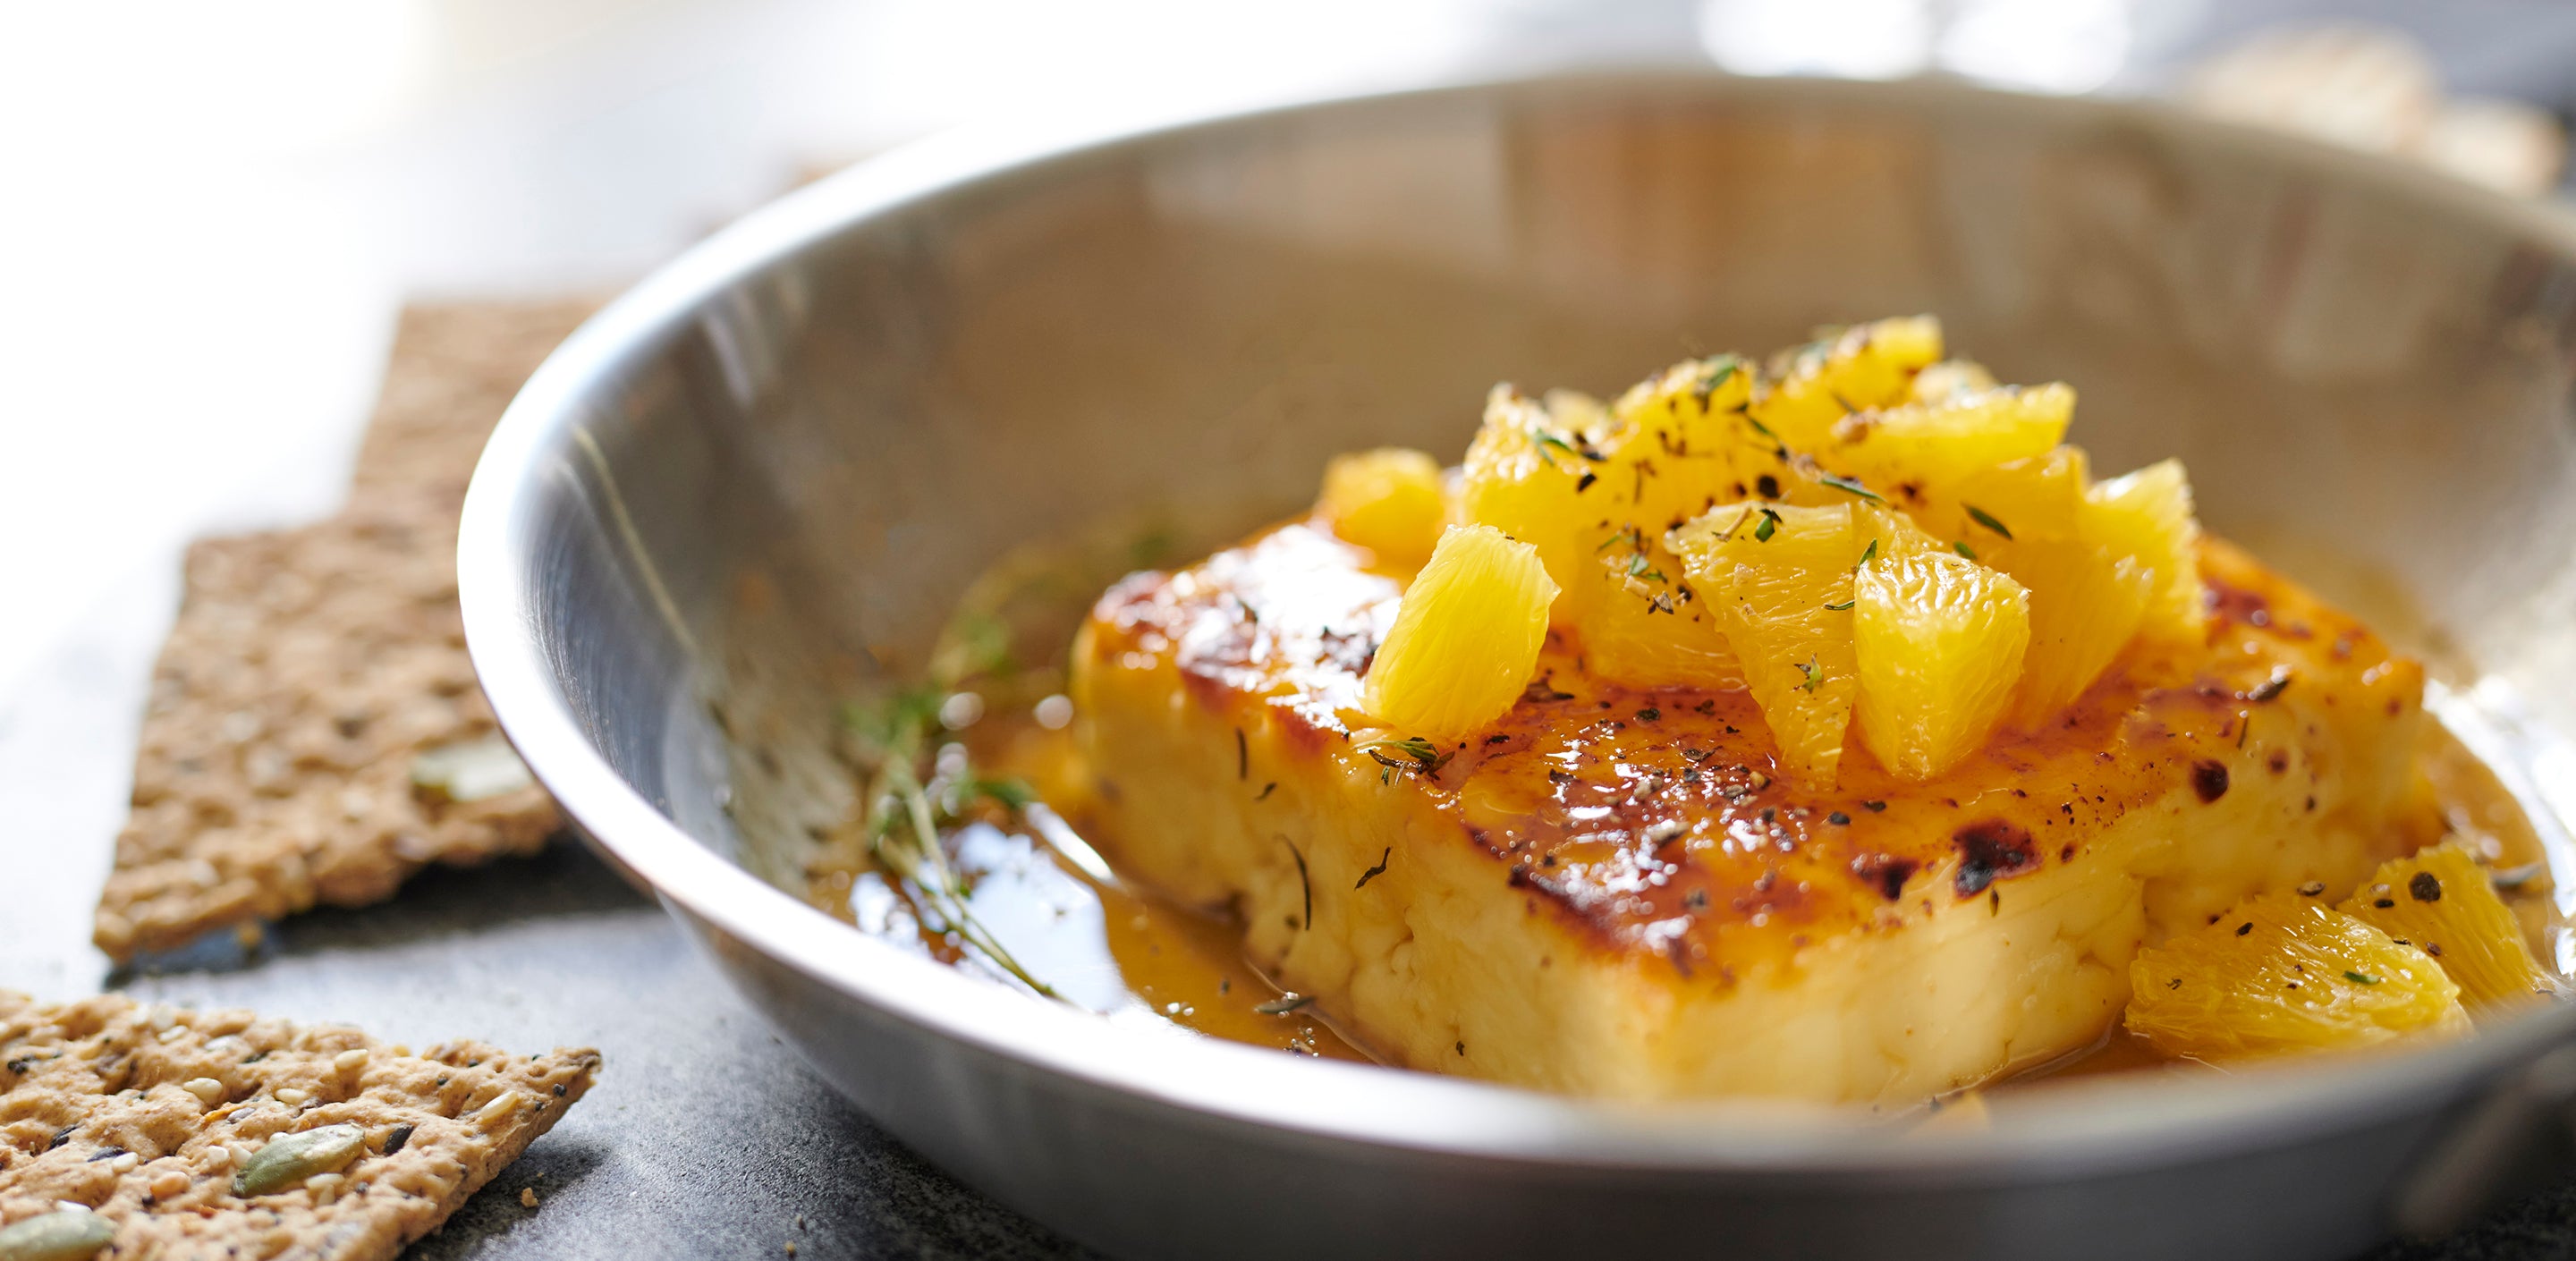 Roasted Feta with Thyme, Honey, and Oranges